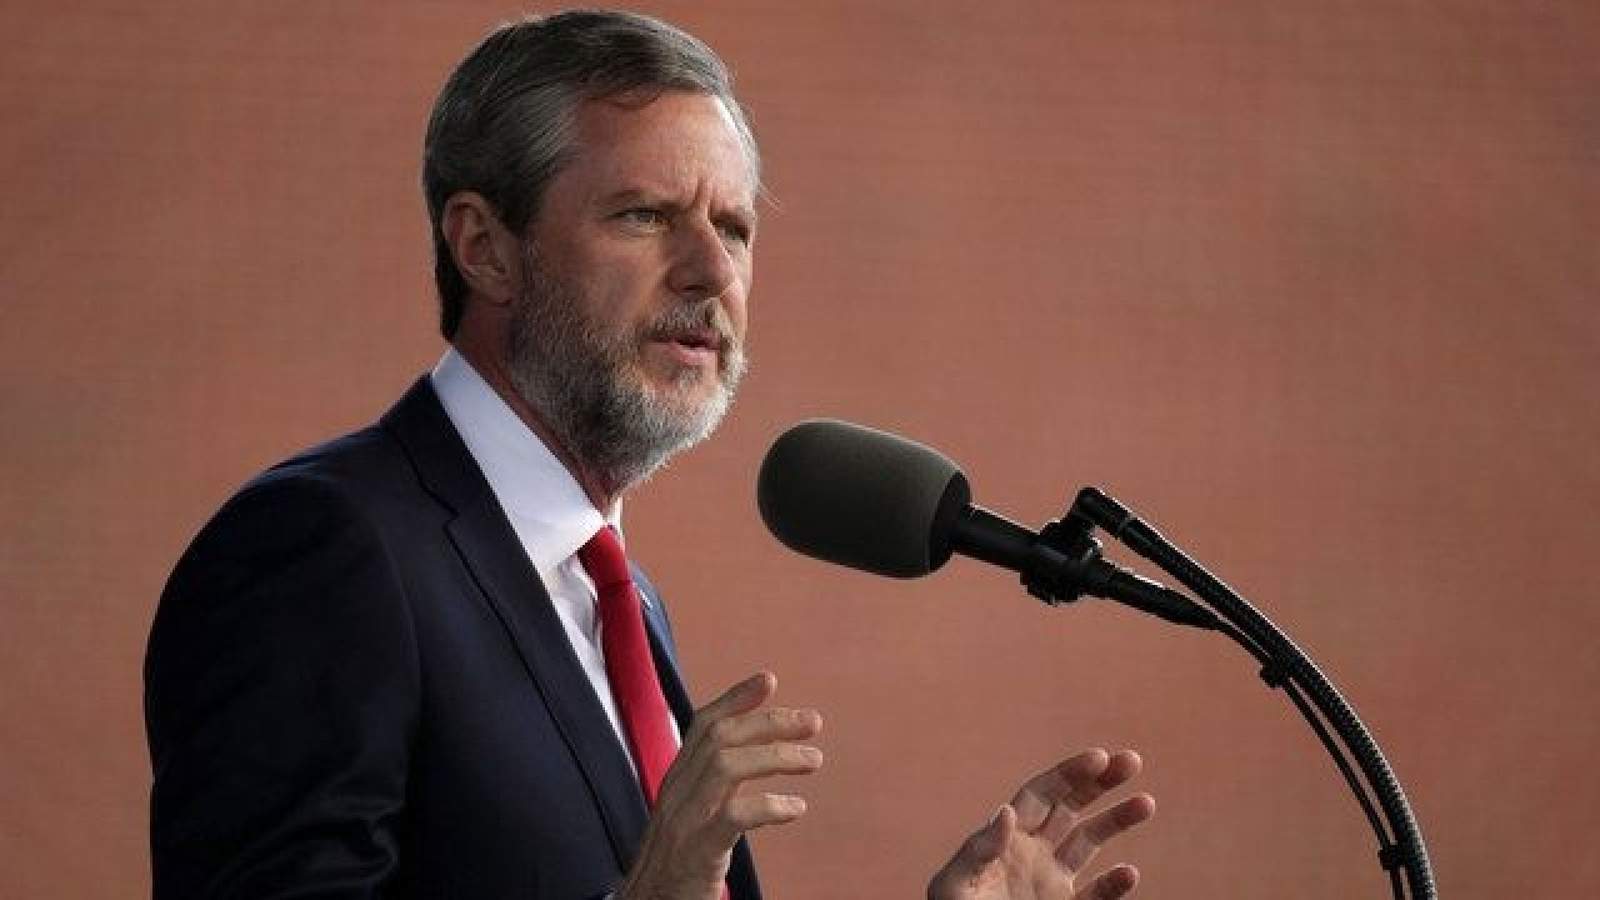 Liberty President Jerry Falwell Jr. 'pretty sure’ he’ll call for civil disobedience in response to Virginia Democrats’ gun control measures